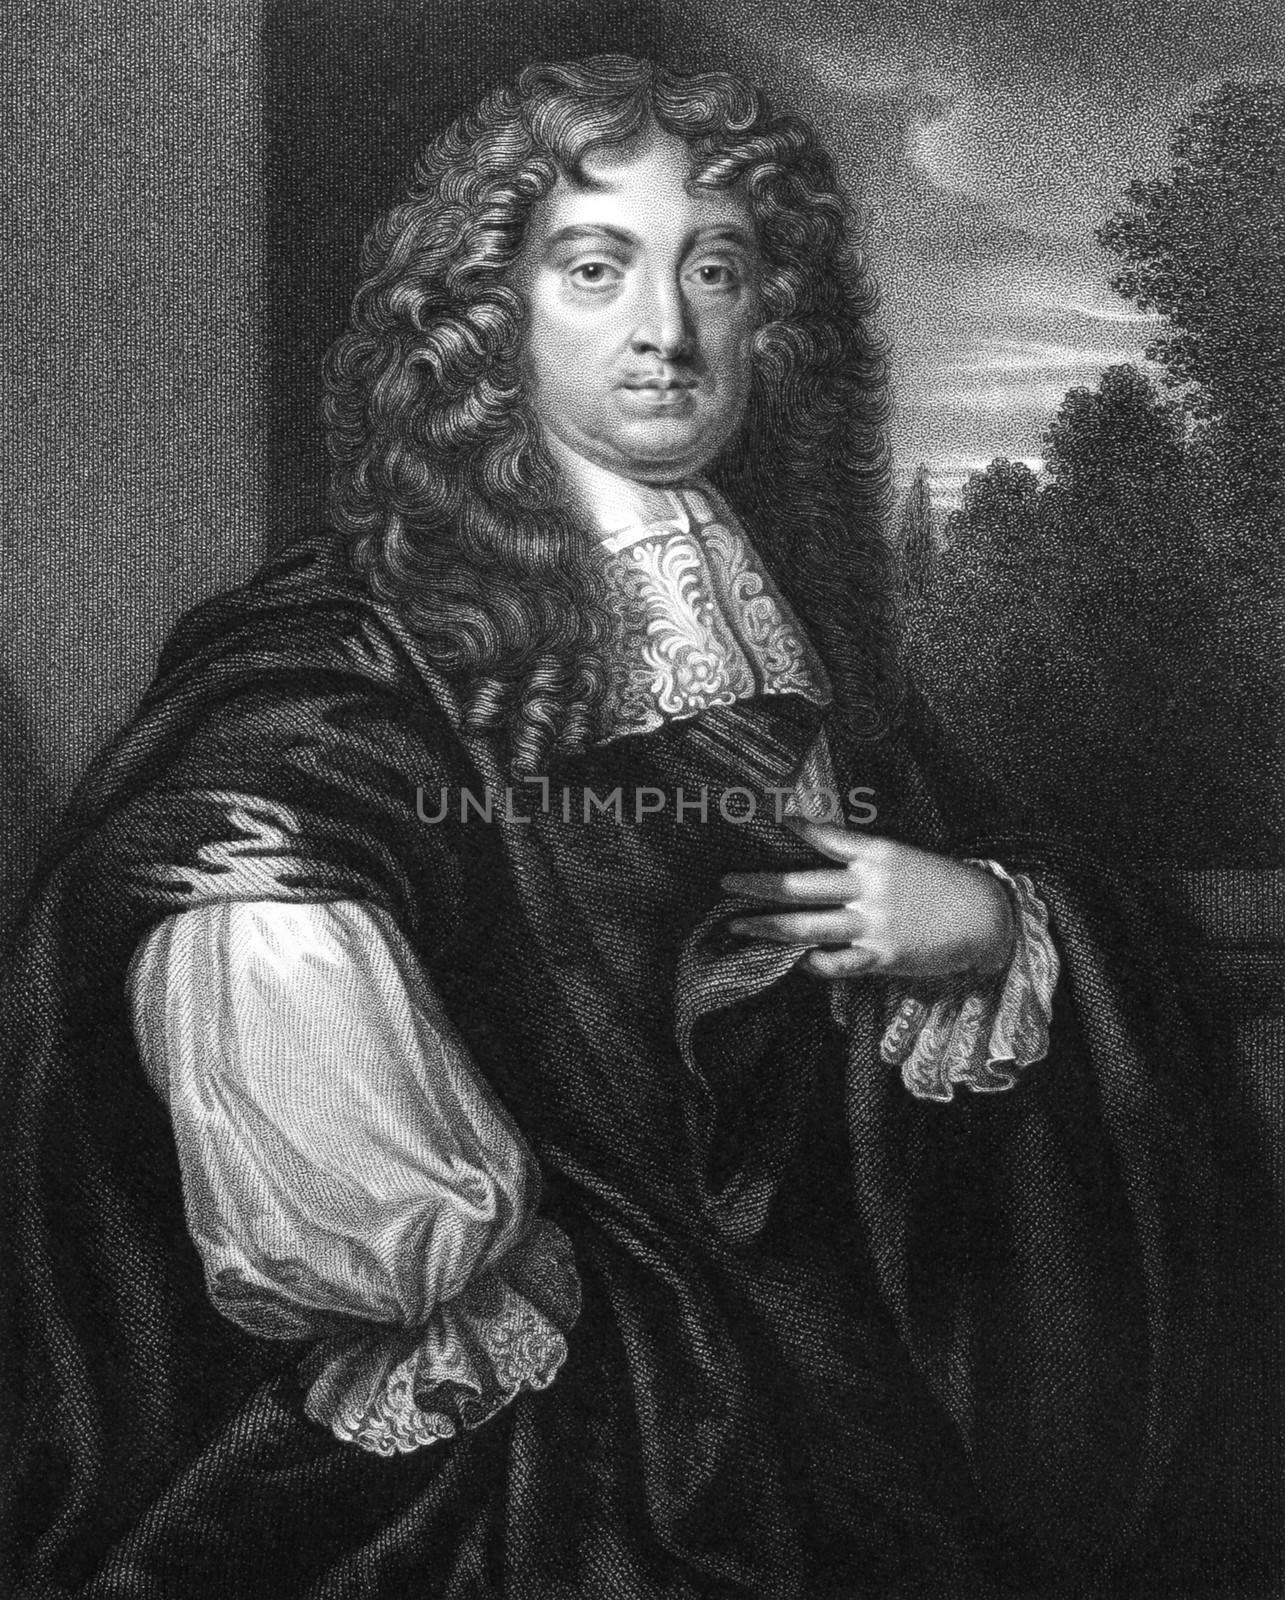 John Maitland, 1st Duke of Lauderdale (1616-1682) on engraving from 1831. Scottish politician, and leader within the Cabal Ministry. Engraved by W.T.Mote and published in ''Portraits of Illustrious Personages of Great Britain'',UK,1831.